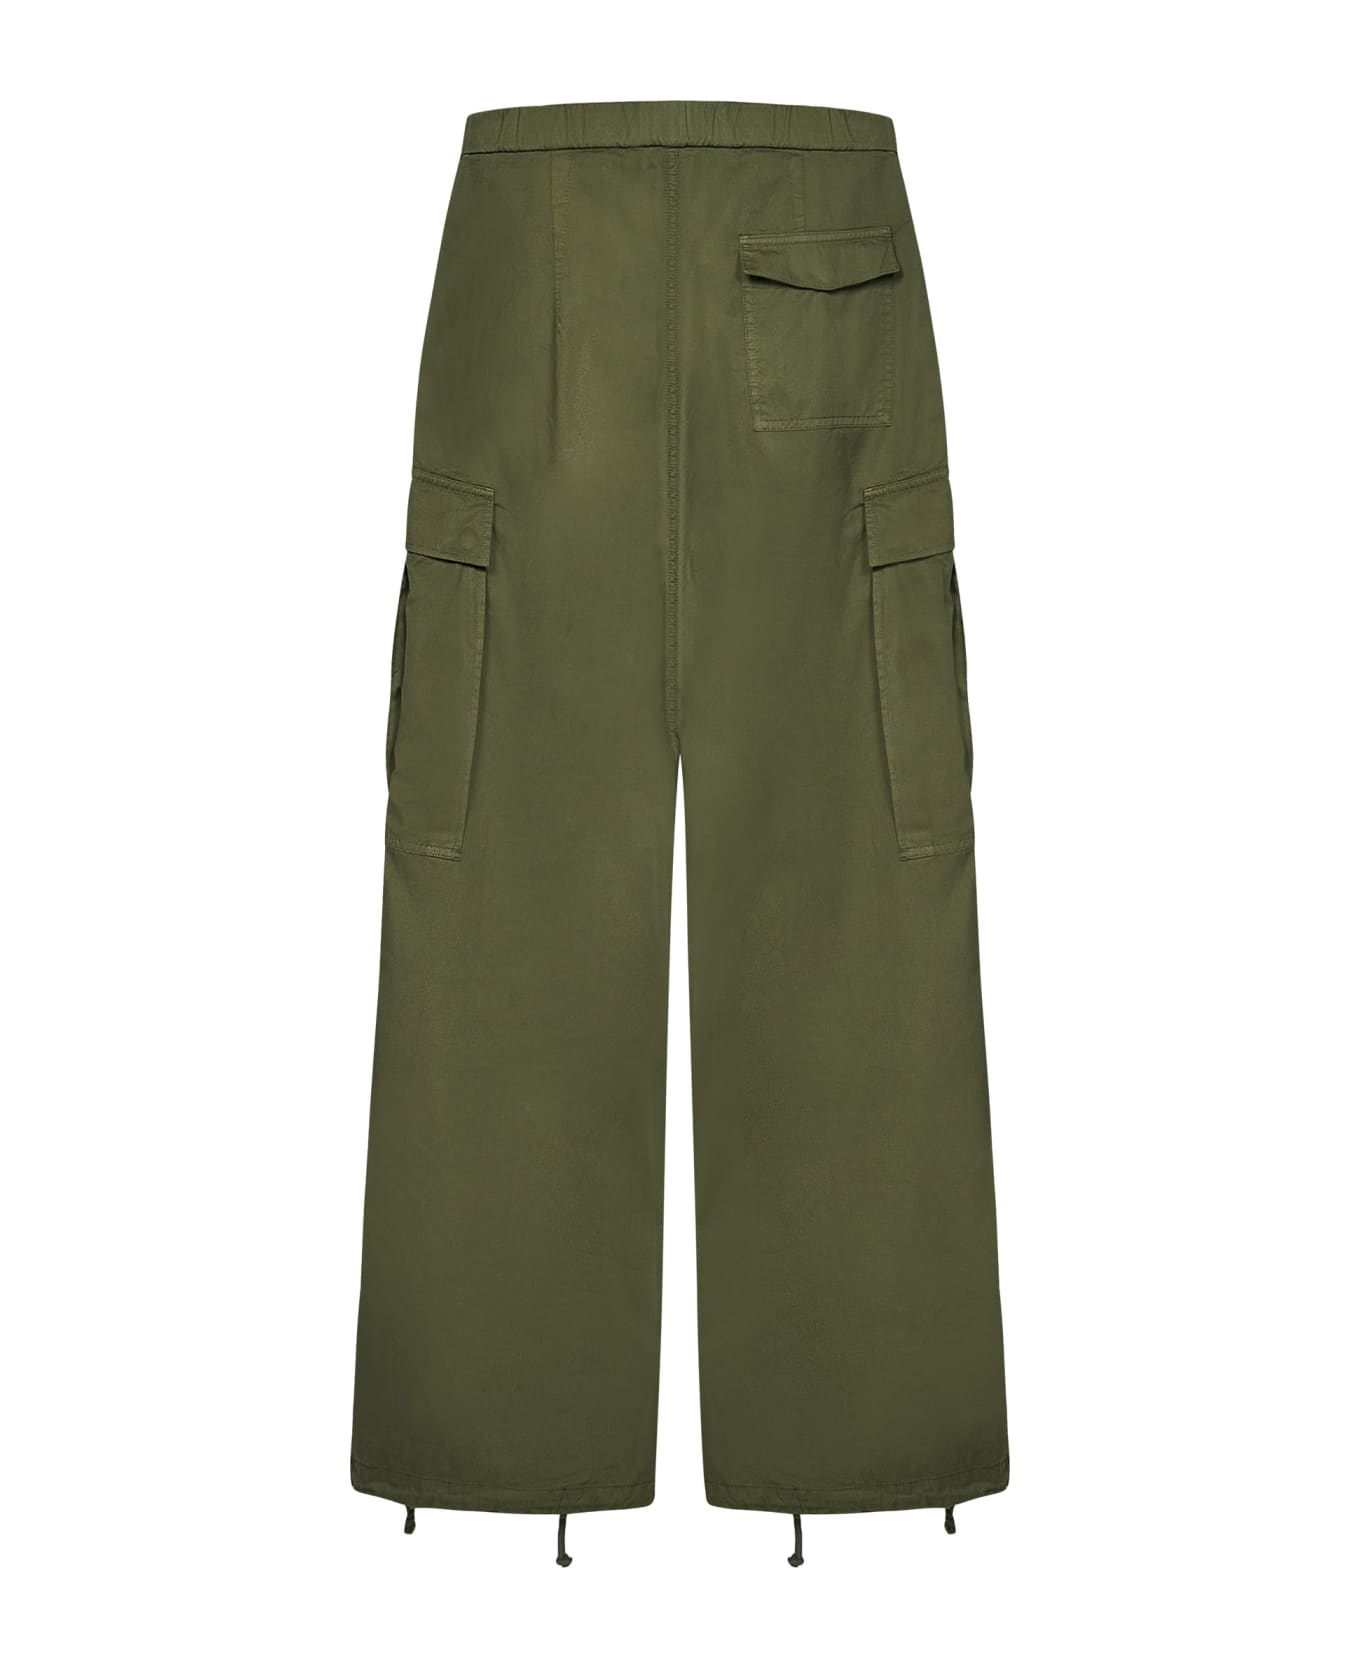 Bluemarble Trousers - Green ボトムス